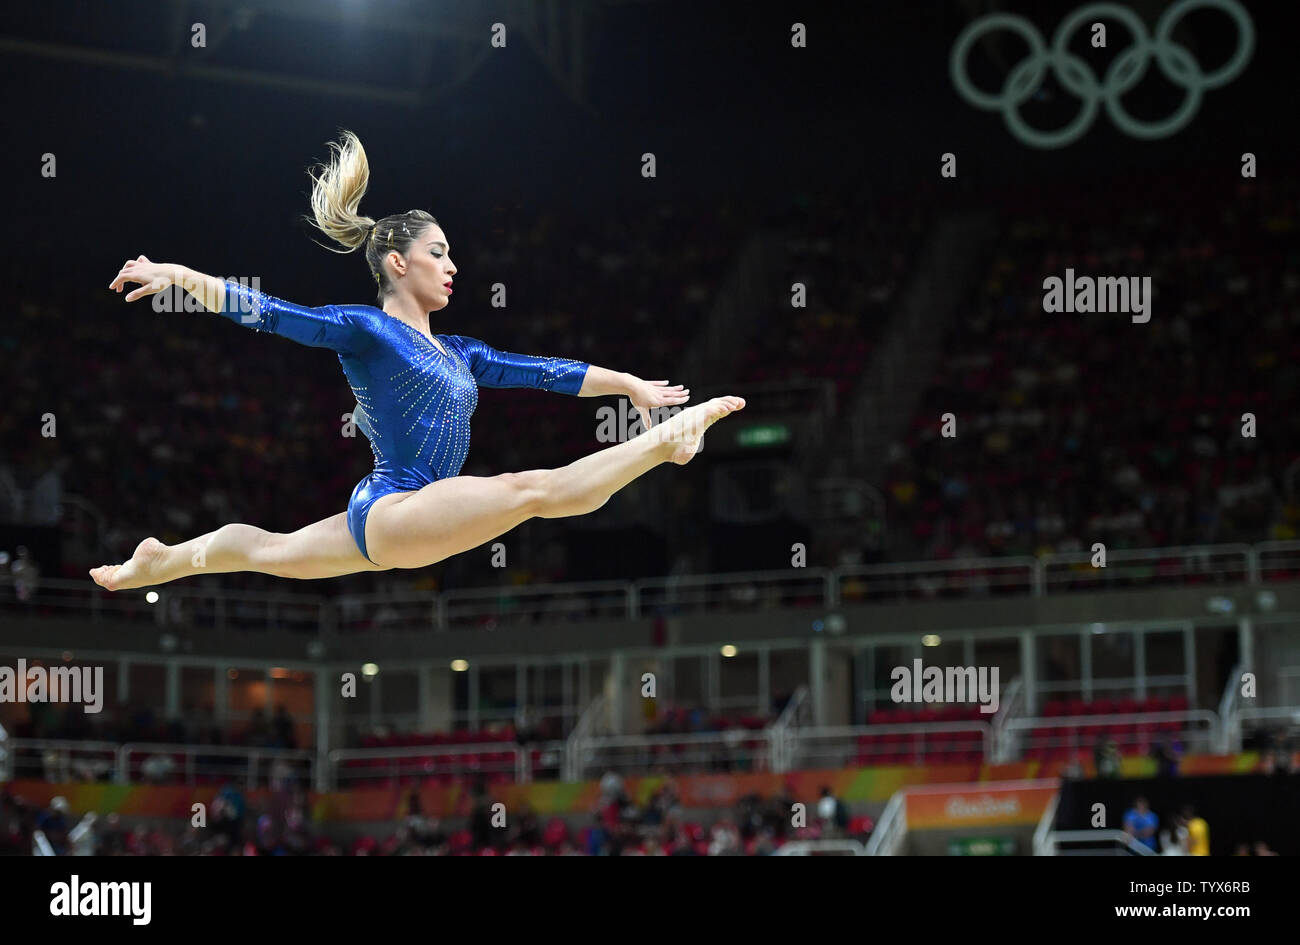 Brazil's Daniele Hypolito competes on the balance beam during the Women's Artistic Gymnastics finals of the 2016 Rio Summer Olympics in Rio de Janeiro, Brazil, August 9, 2016. Photo by Kevin Dietsch/UPI Stock Photo